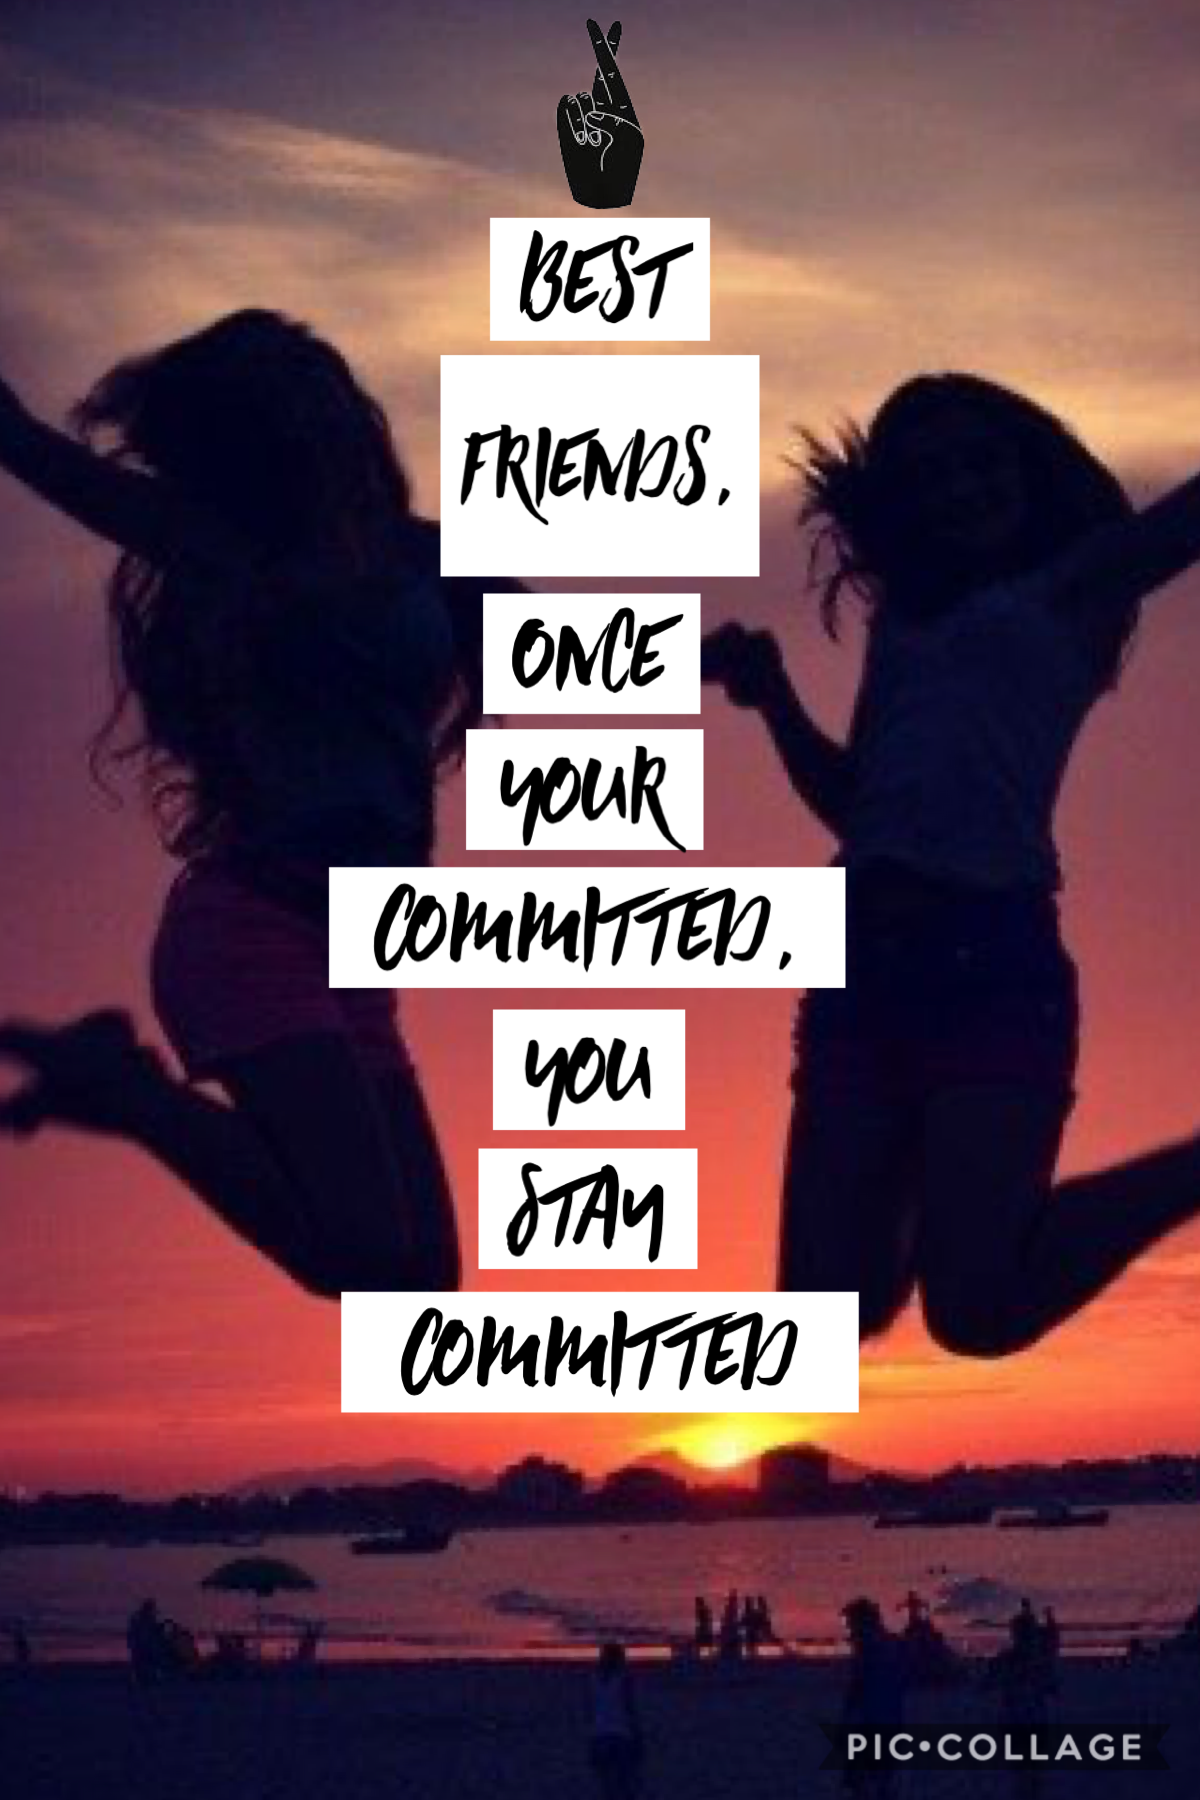 Comment if u have a best friend or best friends